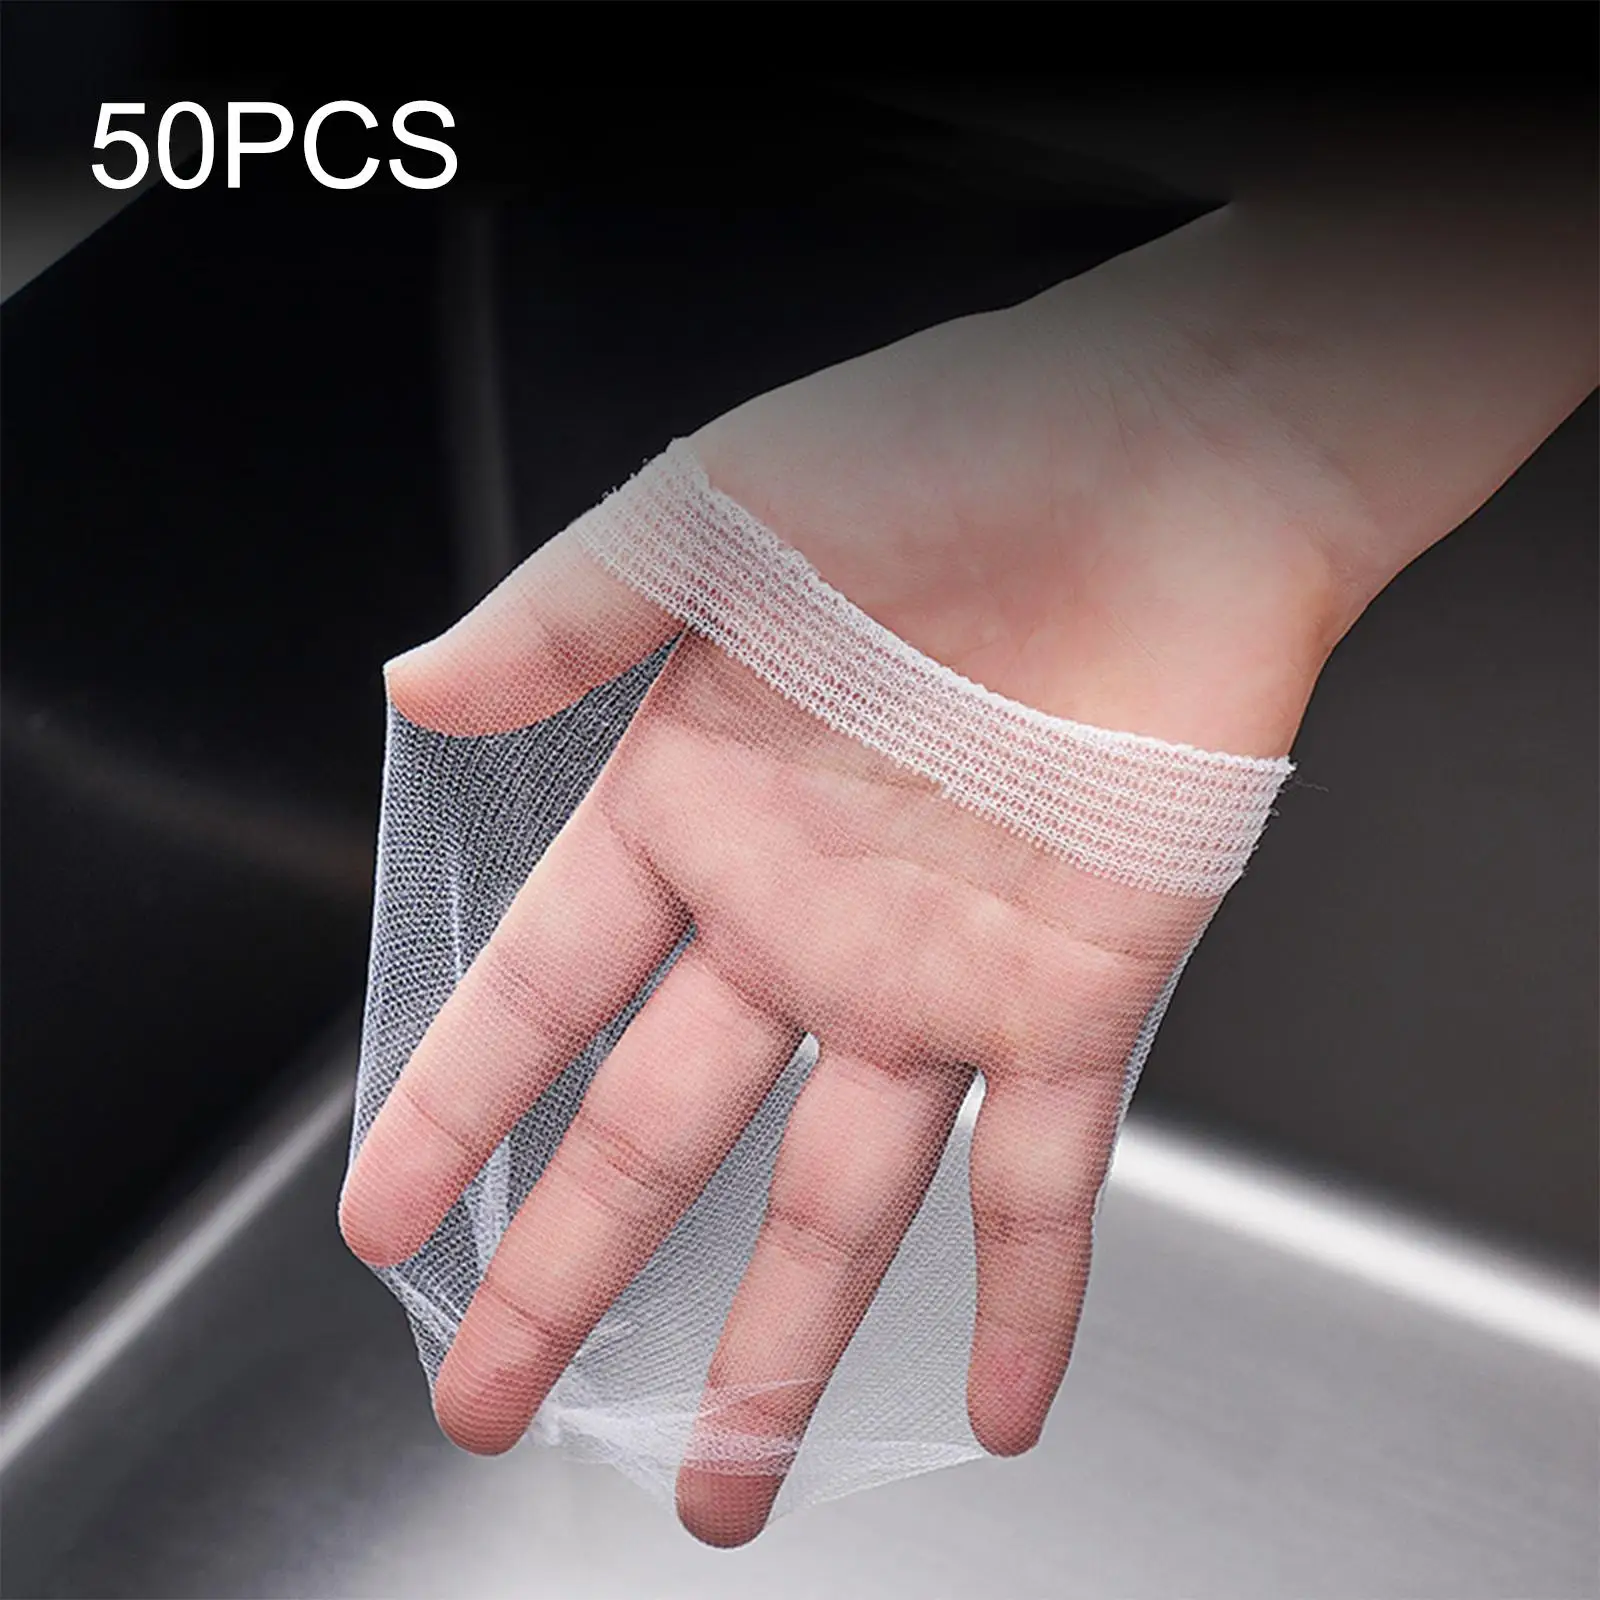 50x Sink Strainer Mesh Bag Sink Strainer Pouch for Bathroom Laundry